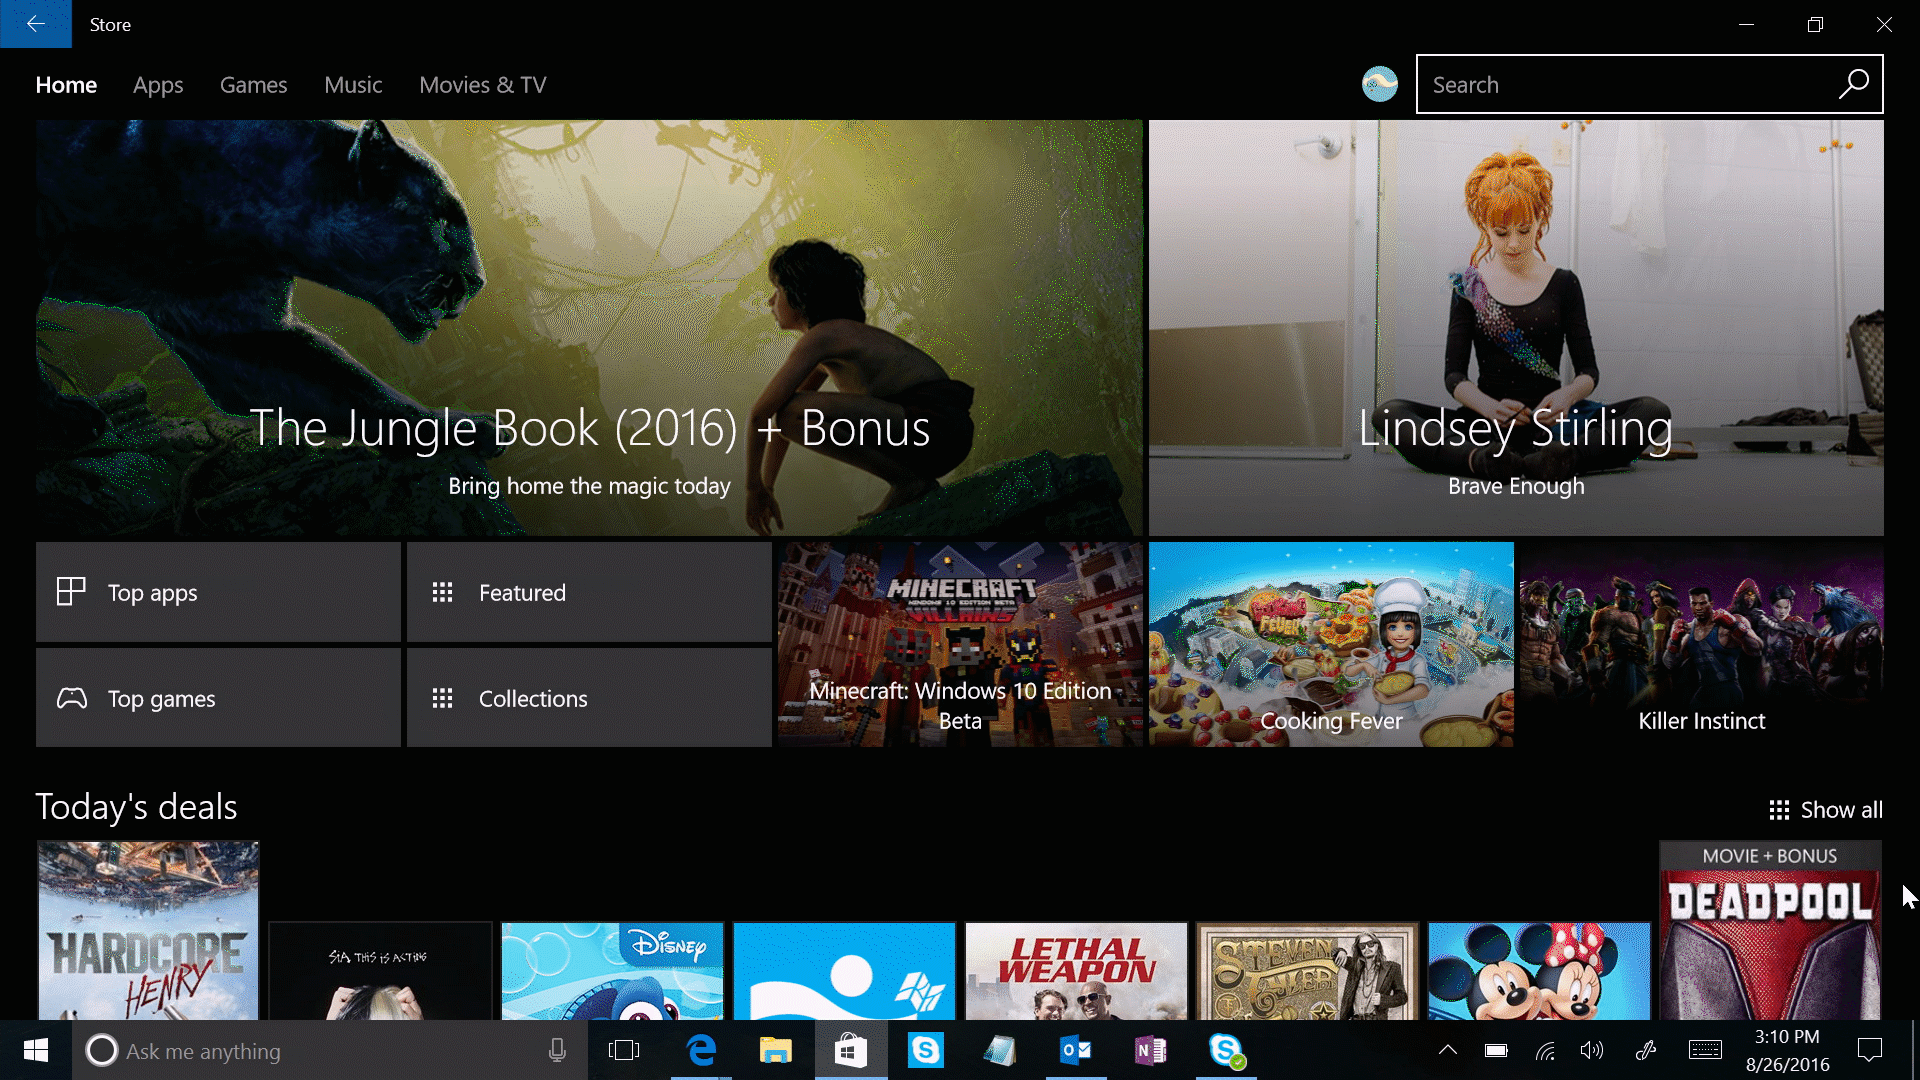 Windows 10 Tip: A closer look at the Windows Store 